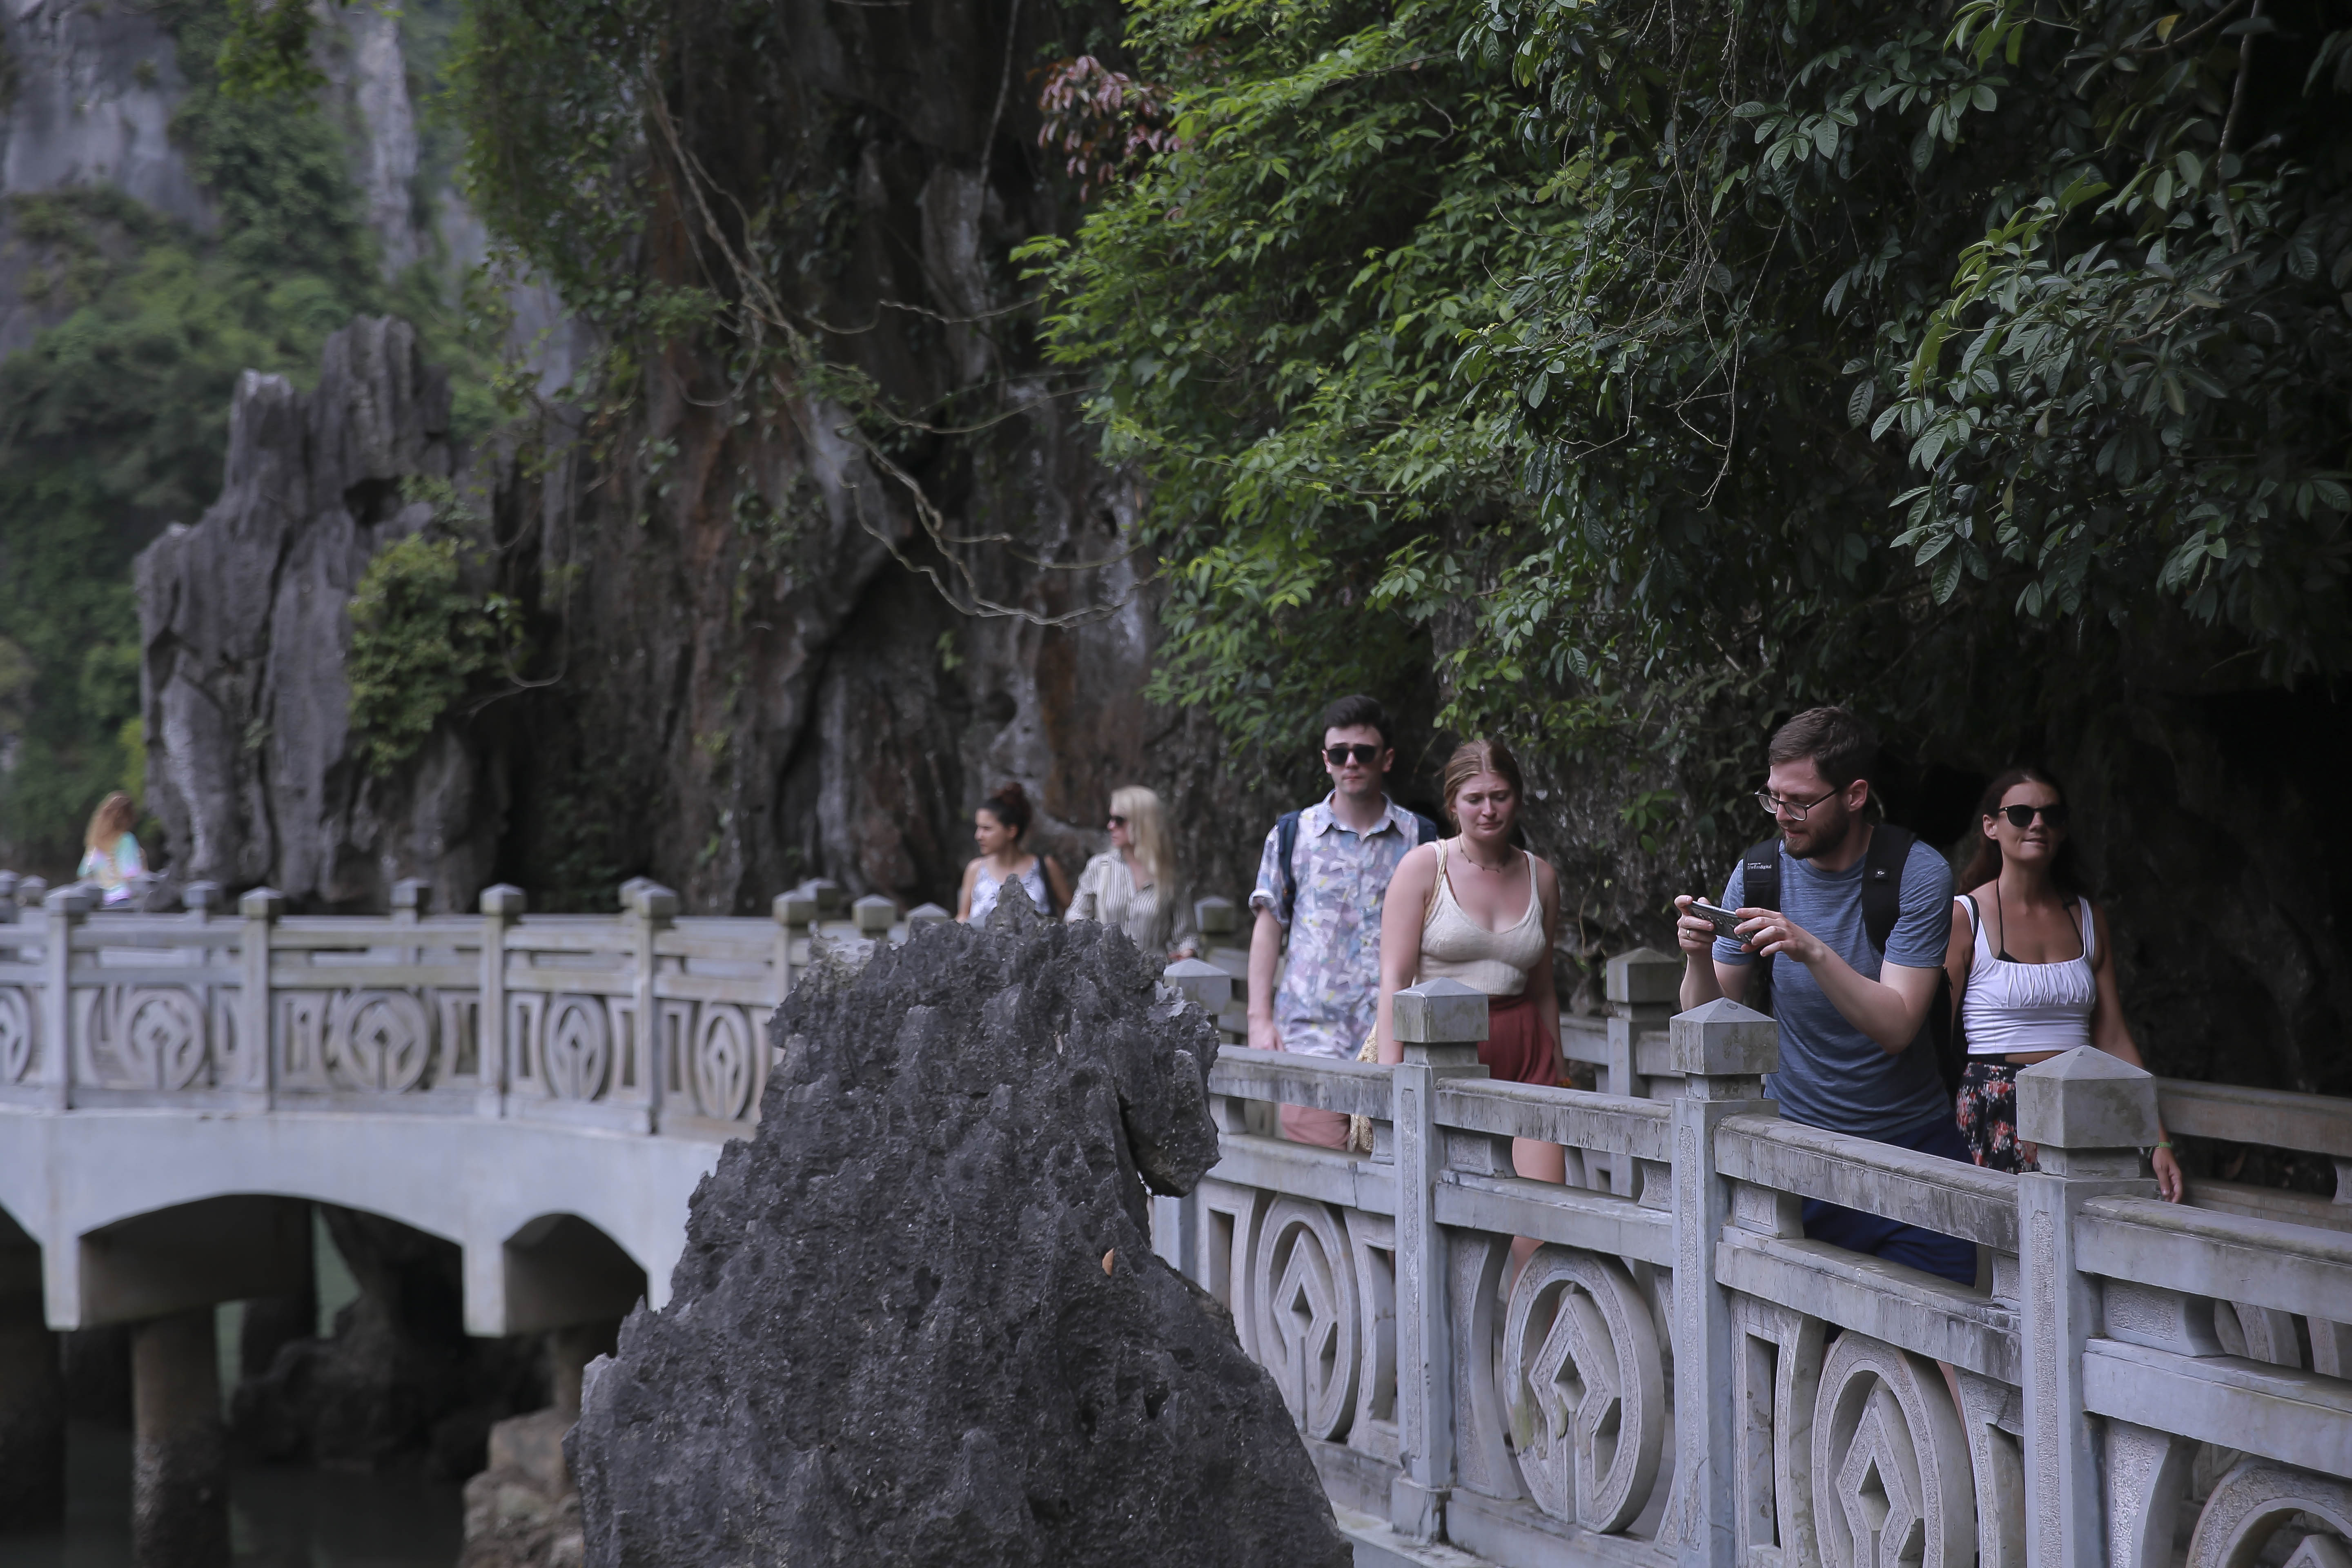 A delegation of international tourists are seen exploring Ha Long Bay.